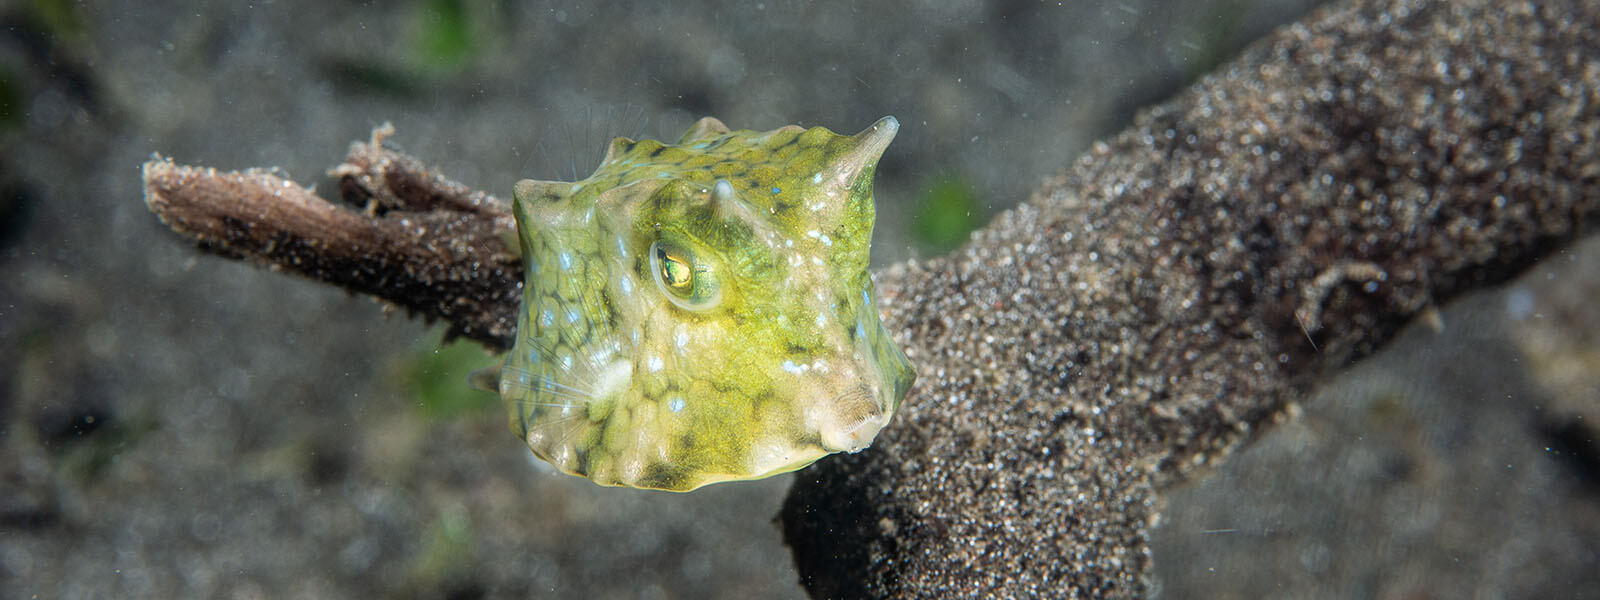 Juvenile boxfish can be found while snorkeling in Kimbe Bay, Papua New Guinea